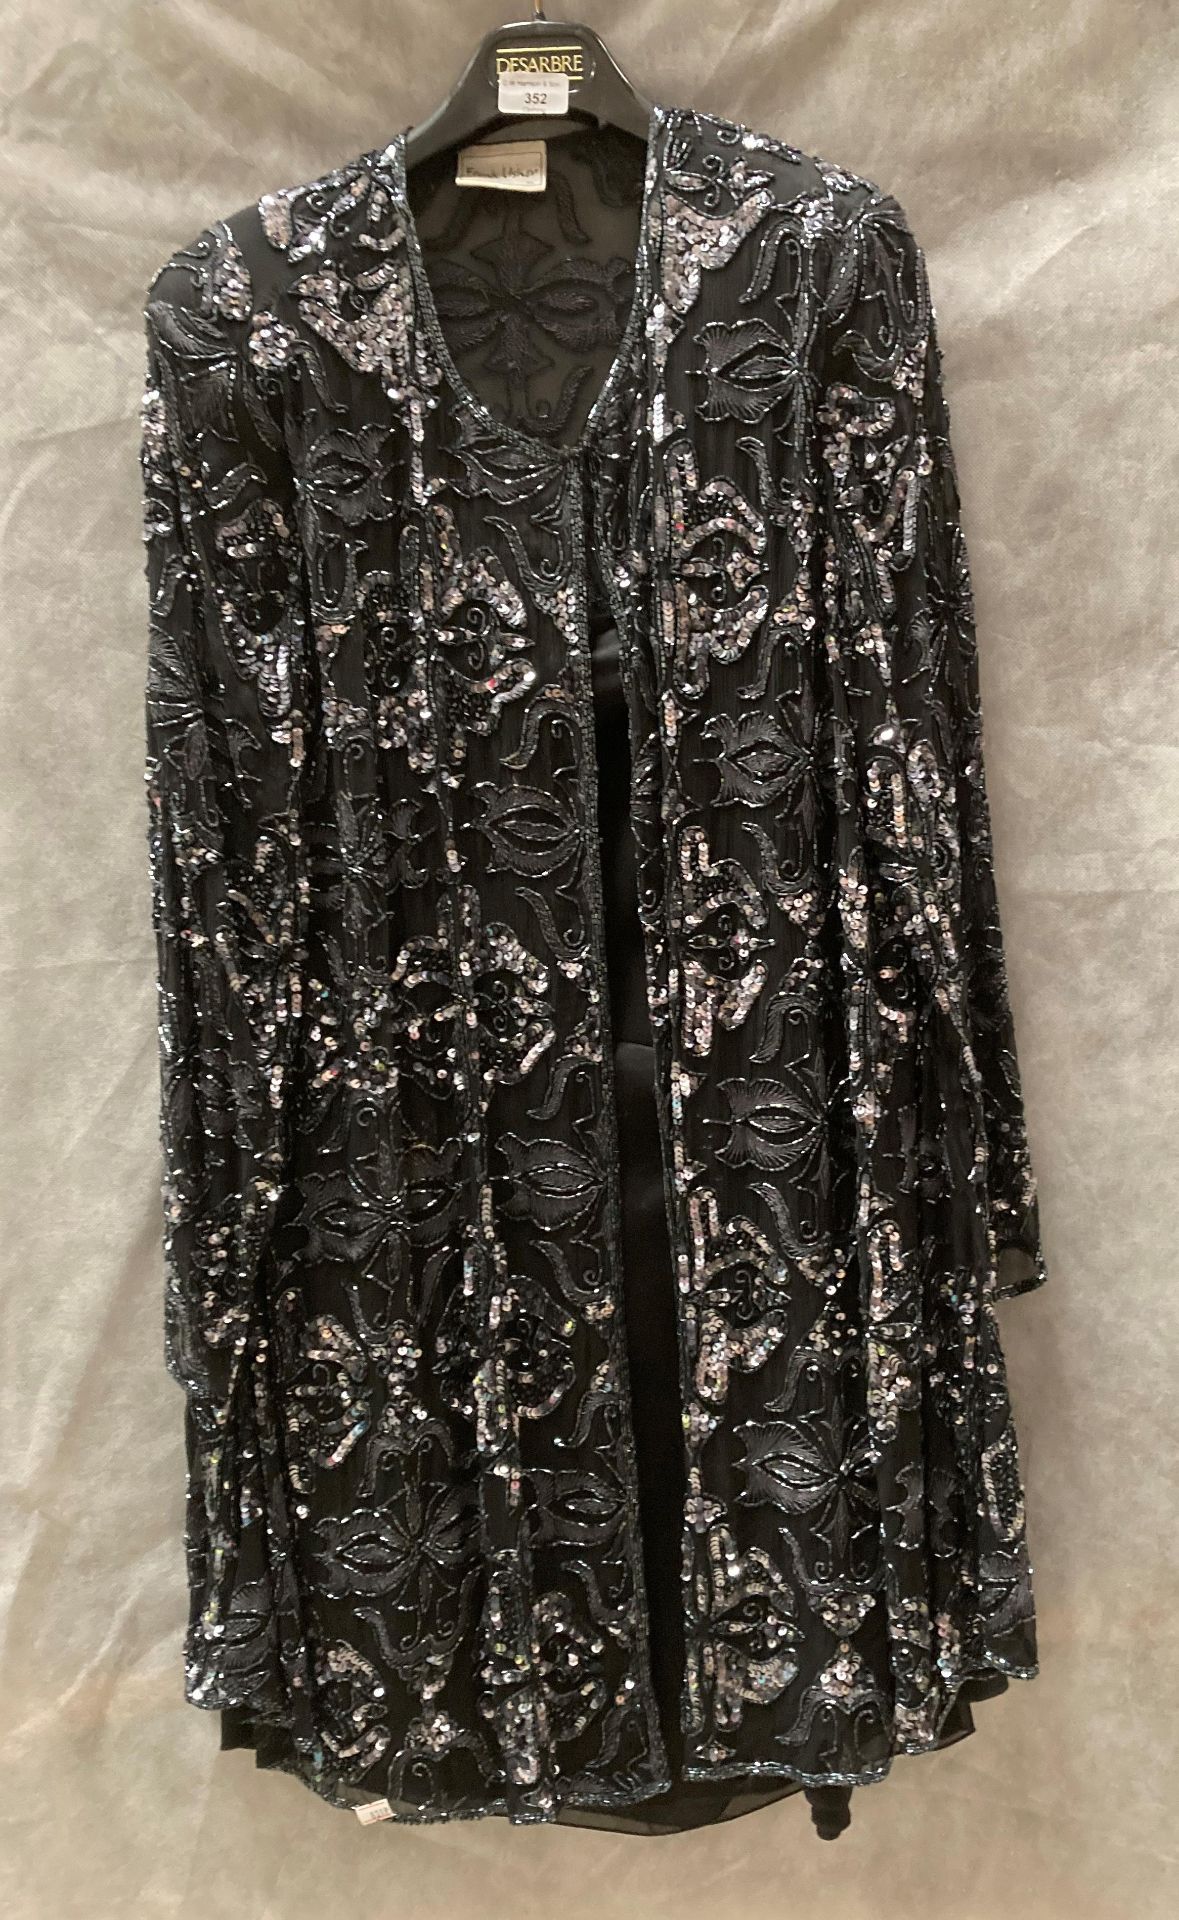 Two items - Gerry Webber black skirt and Frank Usher sequined jacket size XL (Rail 10)